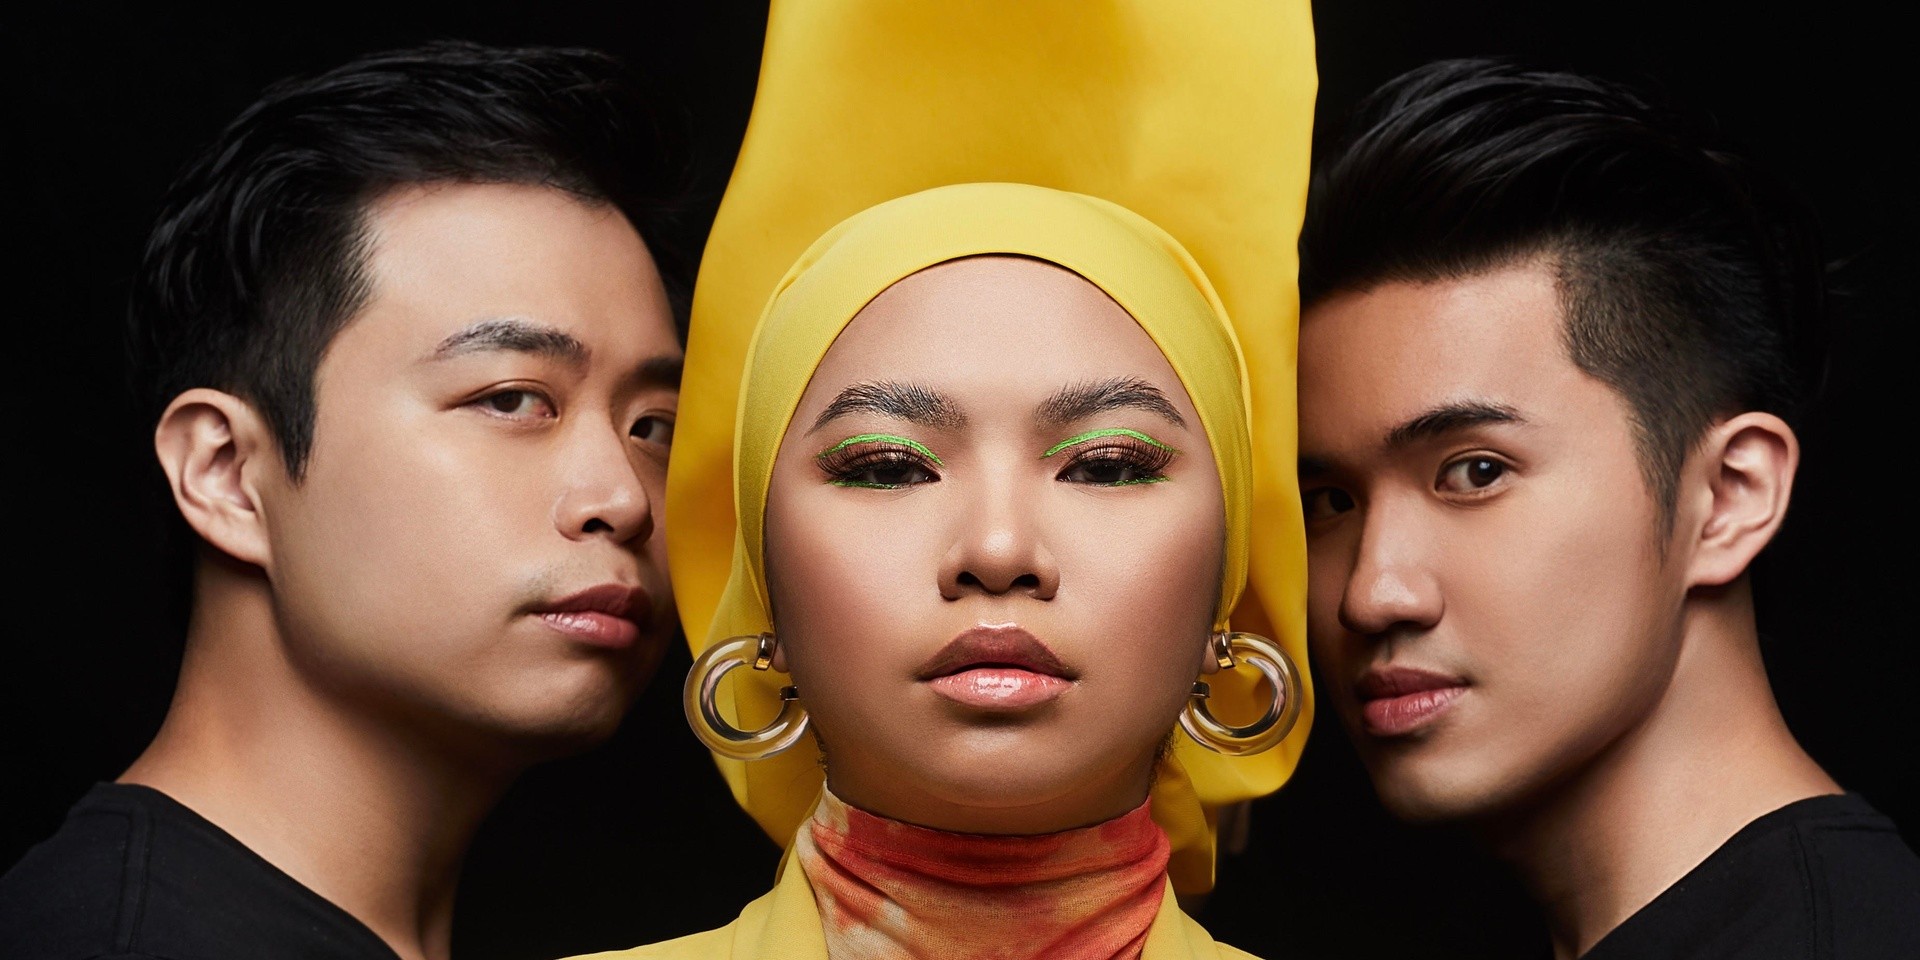 Malaysian dance music duo Spuds marks return with comeback single, 'Ghost' featuring Aina Abdul